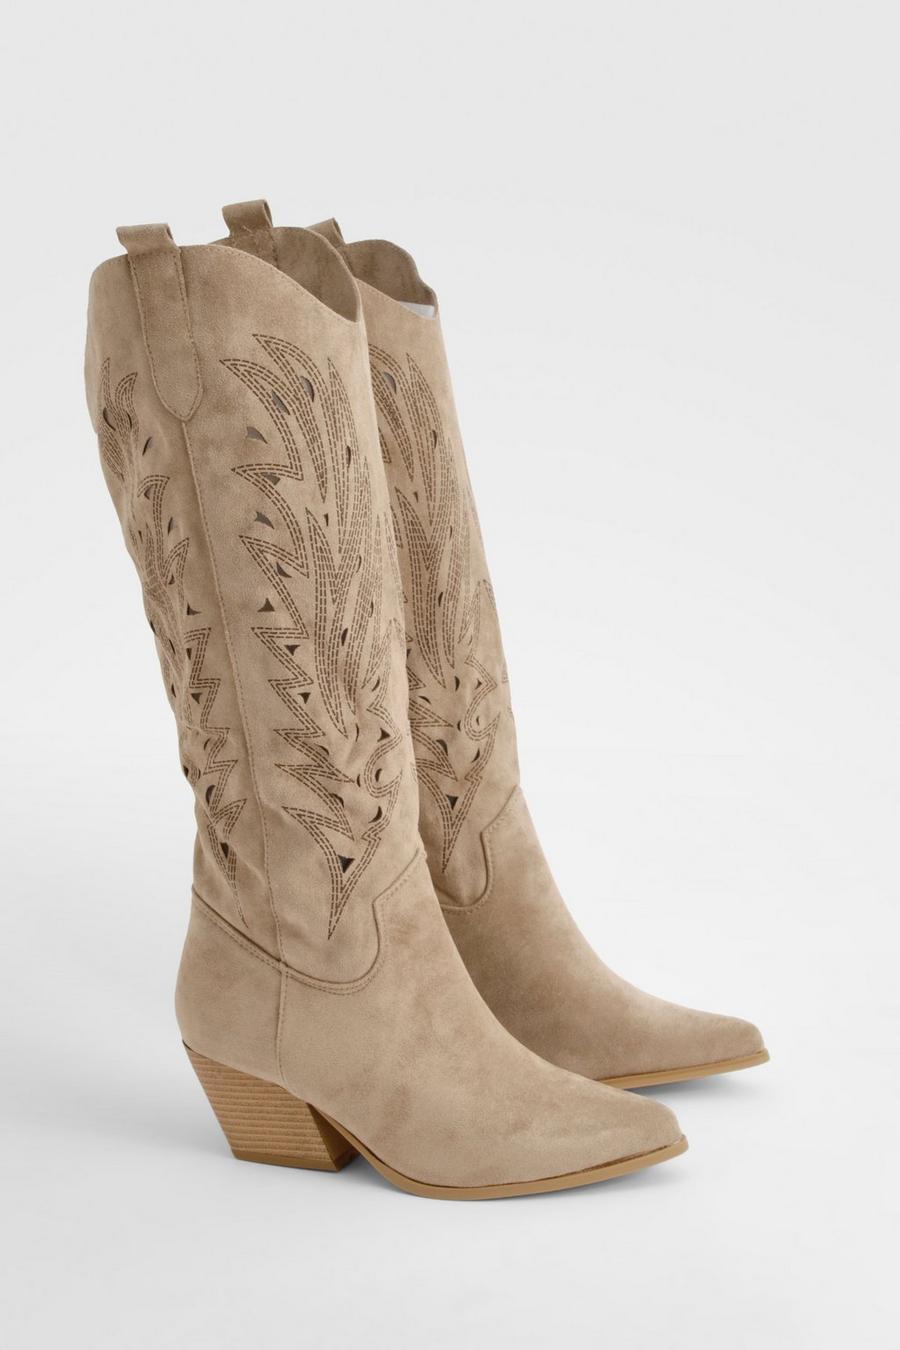 Taupe Embroidered Cut Knee High Western Boots 